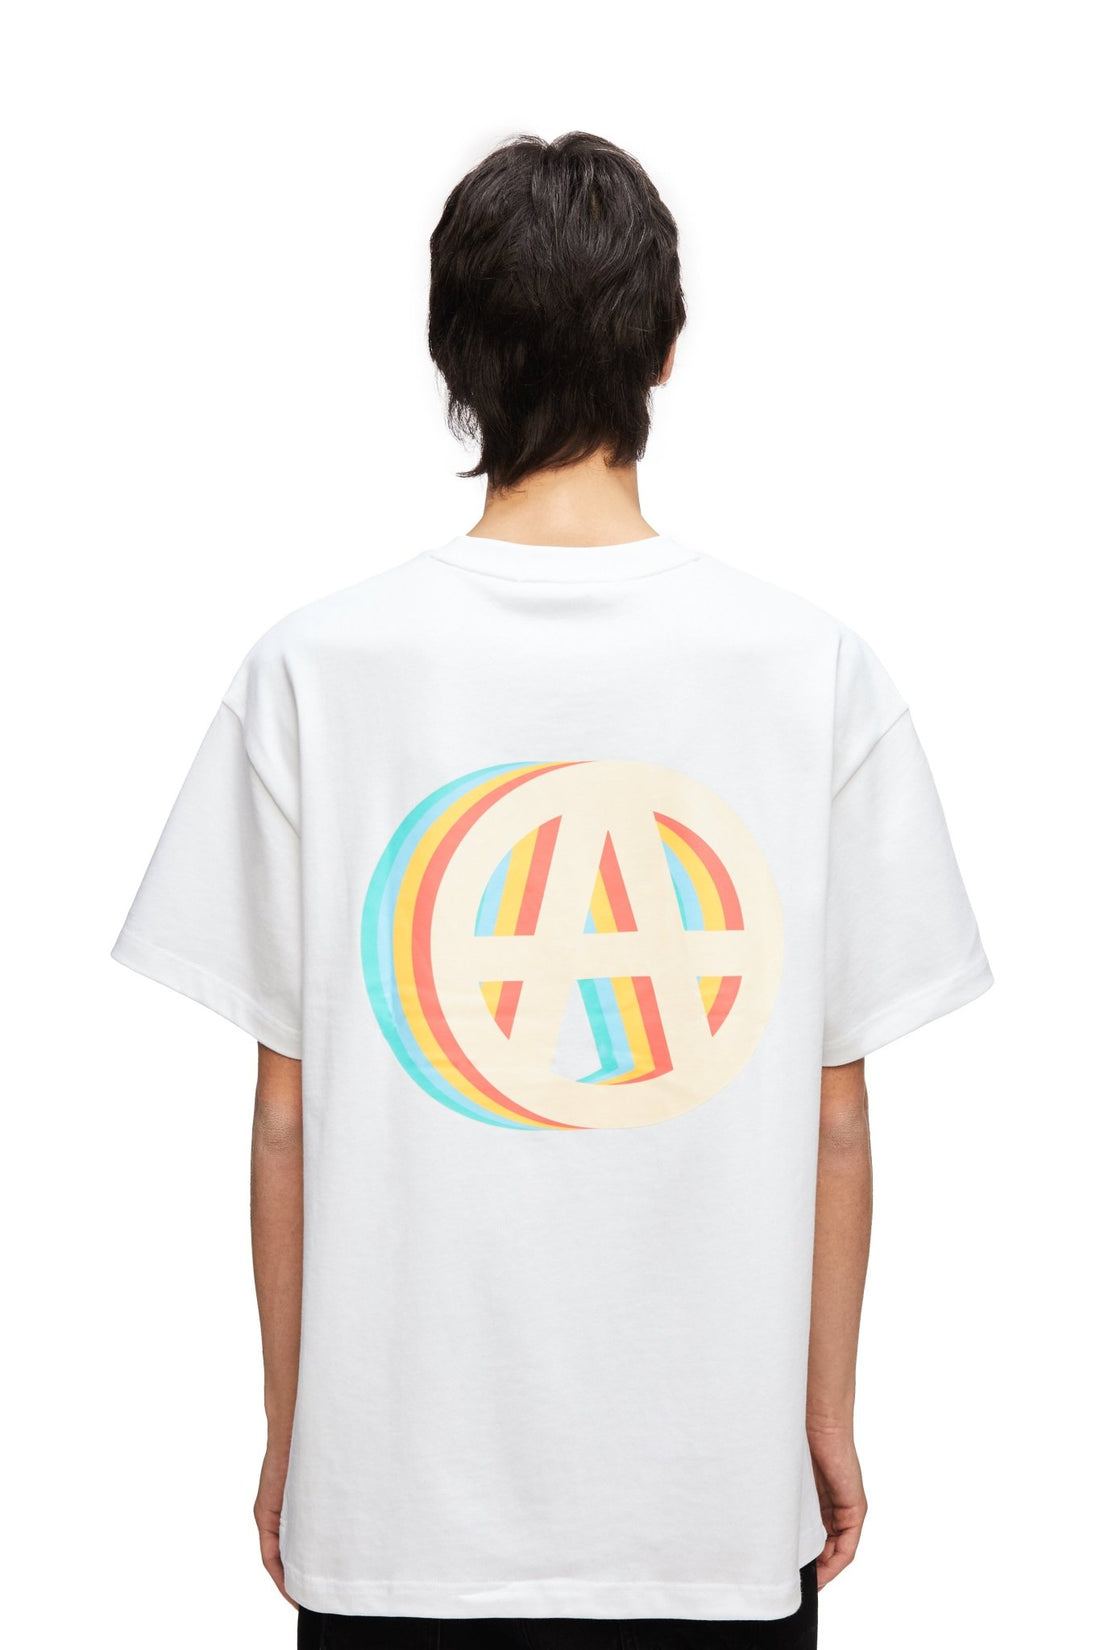 CIRCLE A T-SHIRT Acupuncture